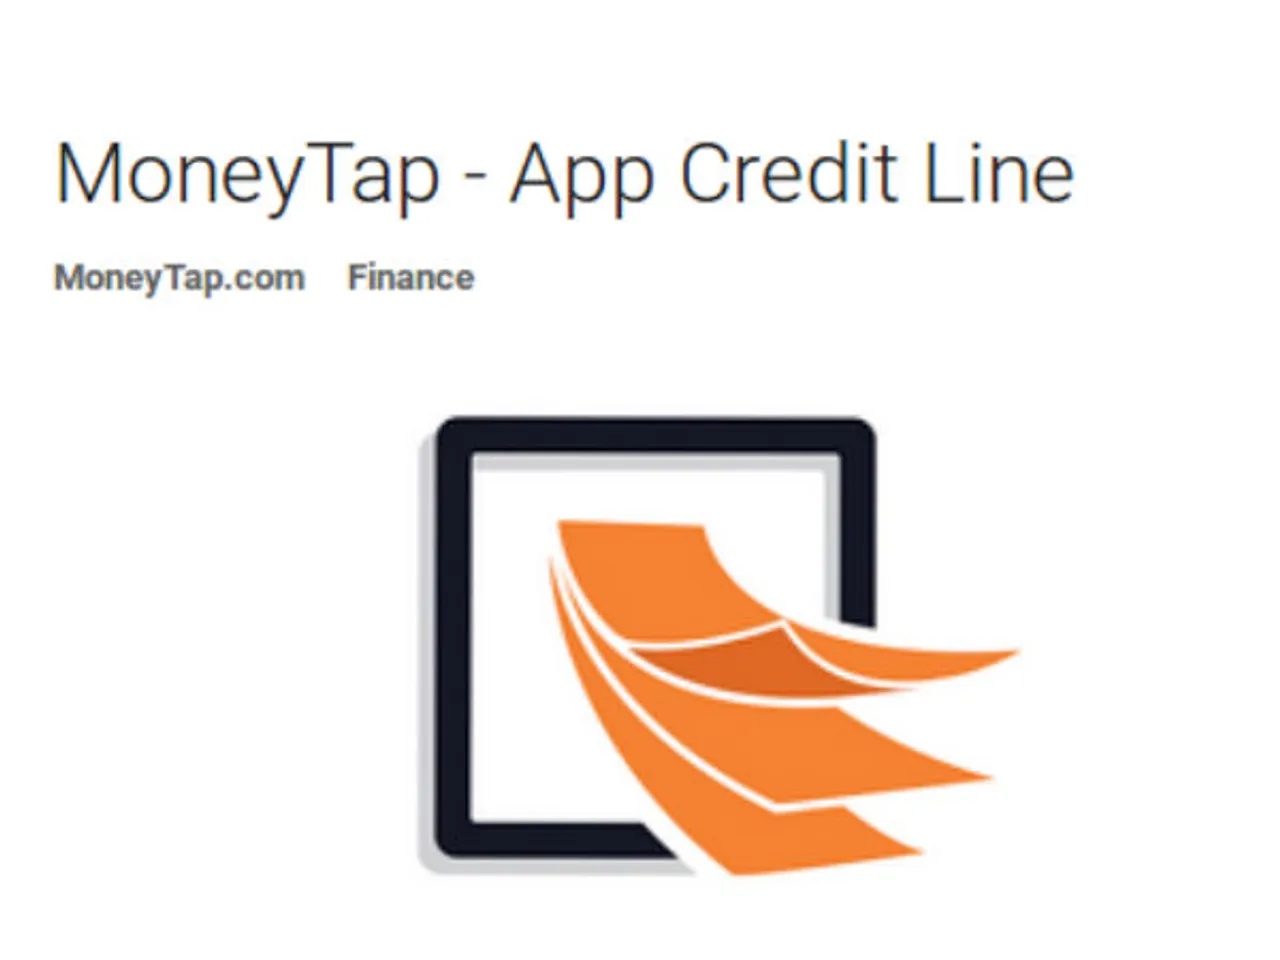 CIOL MoneyTap launches app-based Credit Line with a limit of Rs 5 lakhs